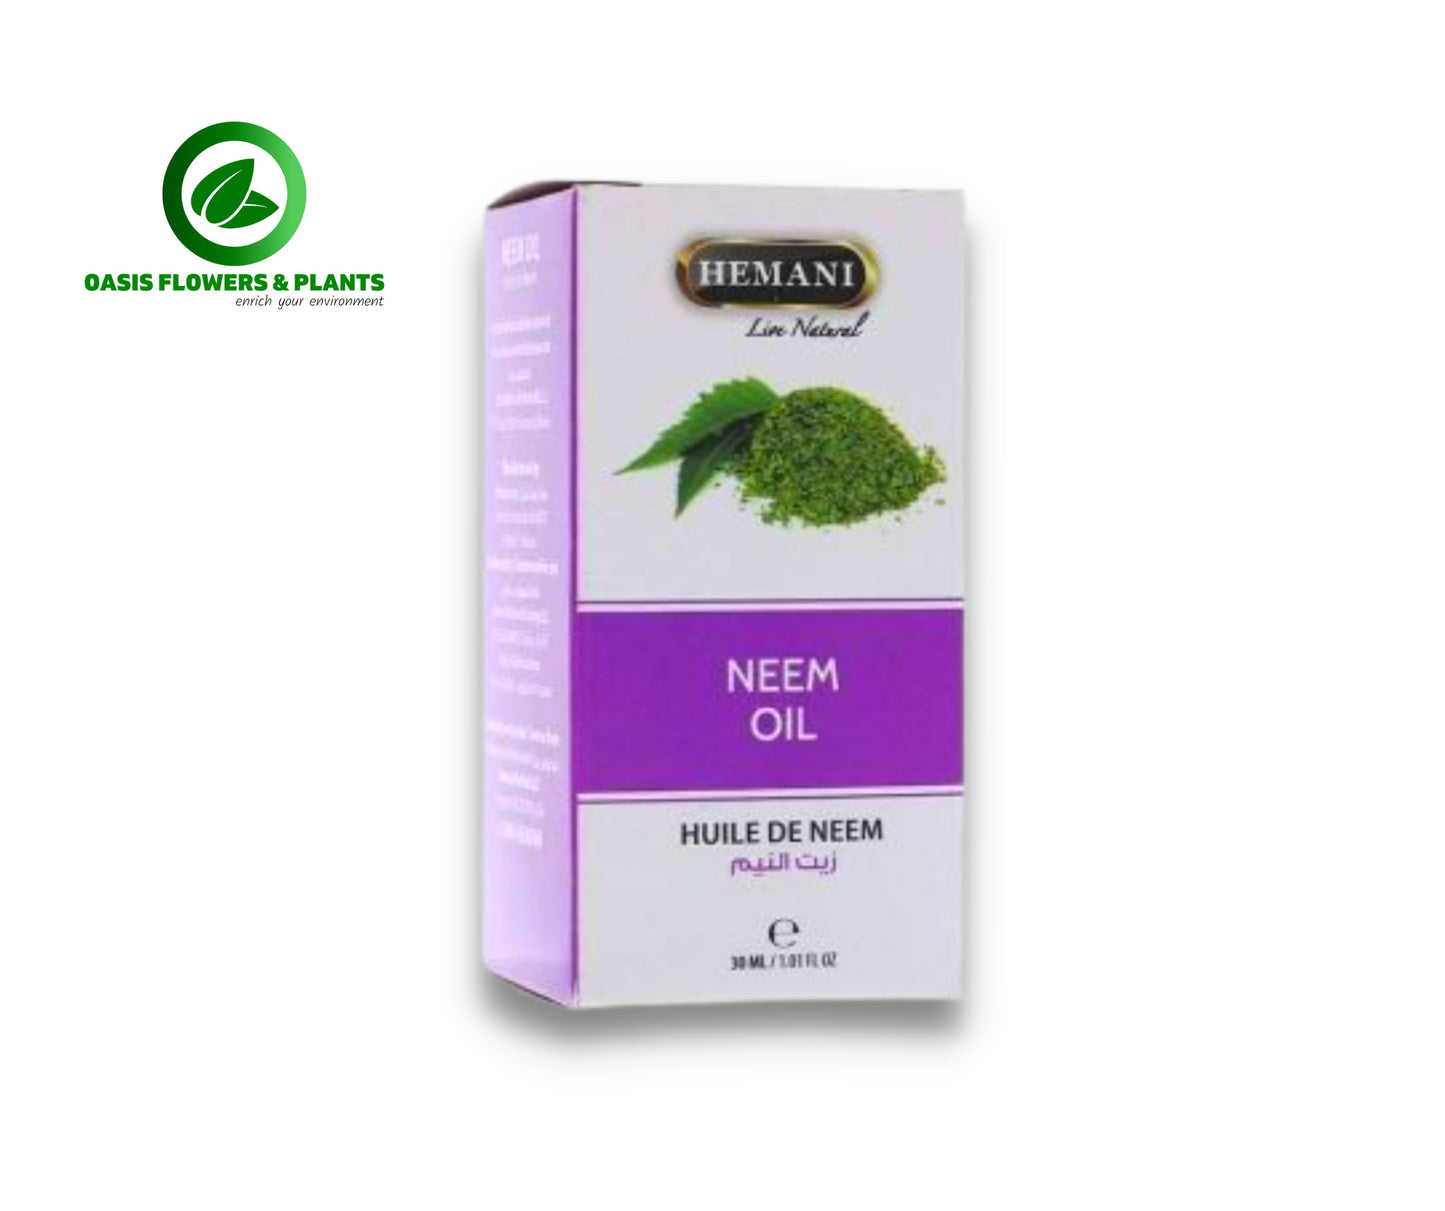 Neem oil for head lice and skin infections - Hemani